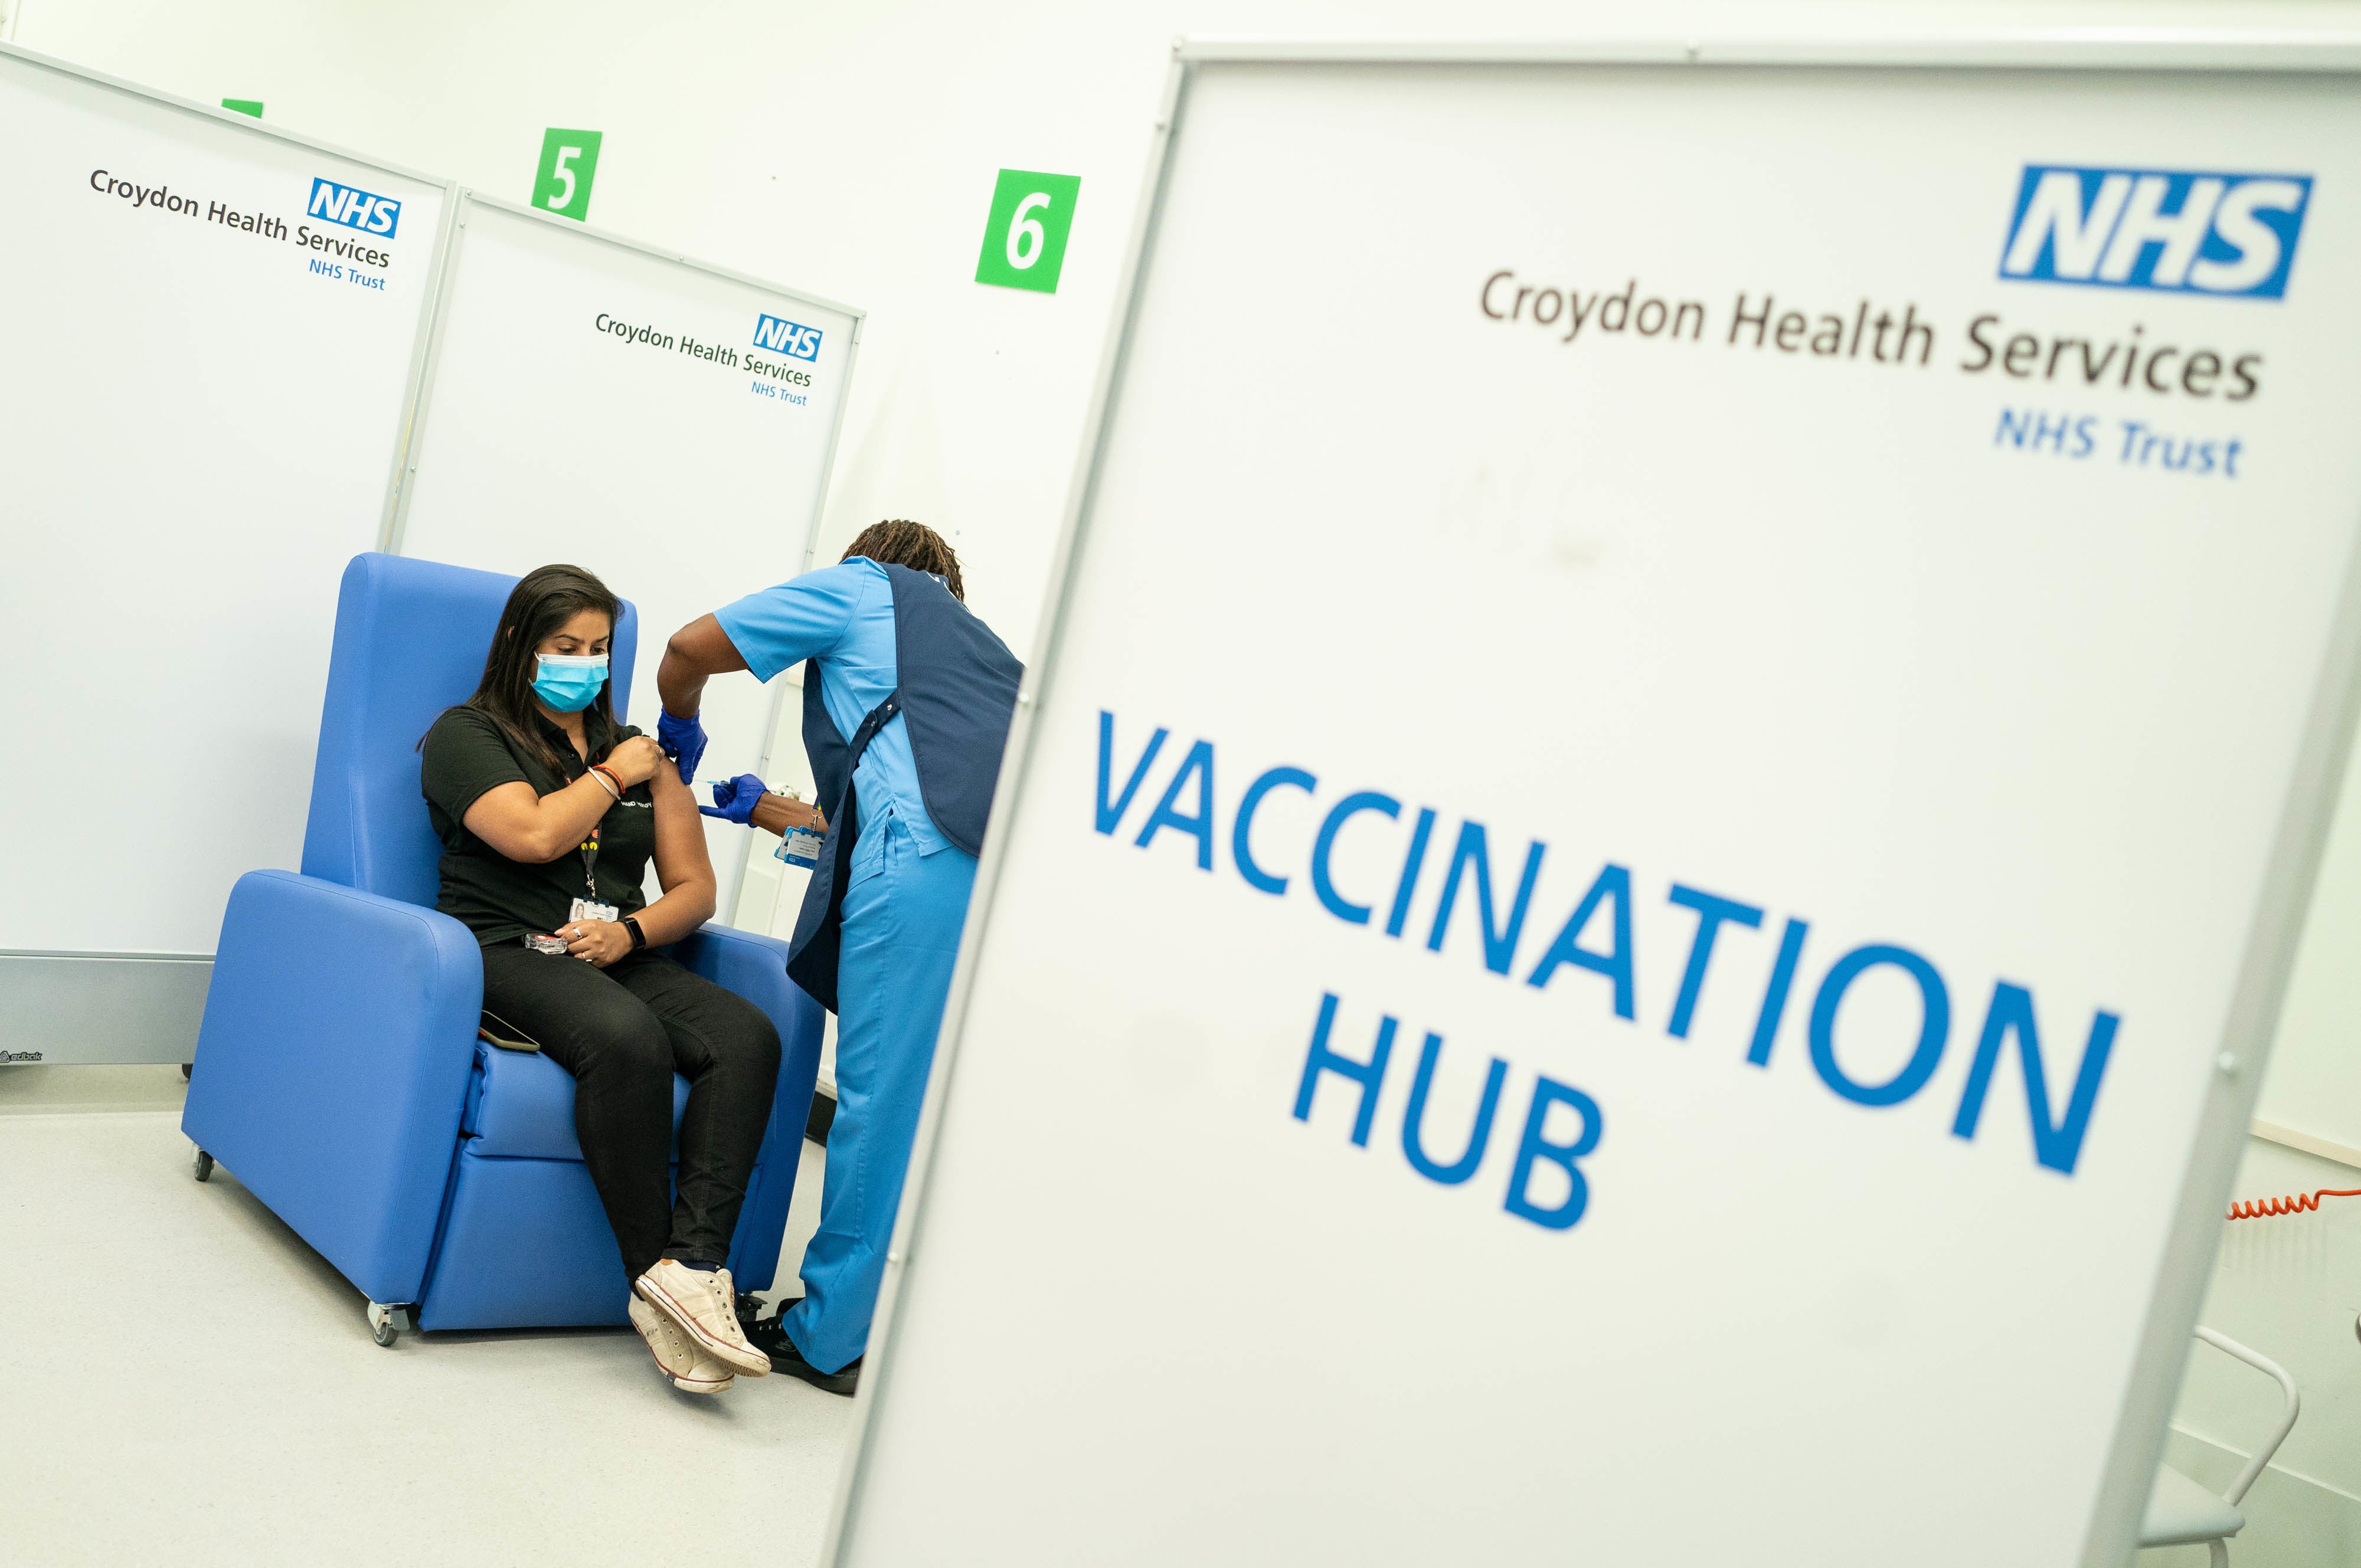 Almost 80 per cent of the UK’s eligible population is vaccinated